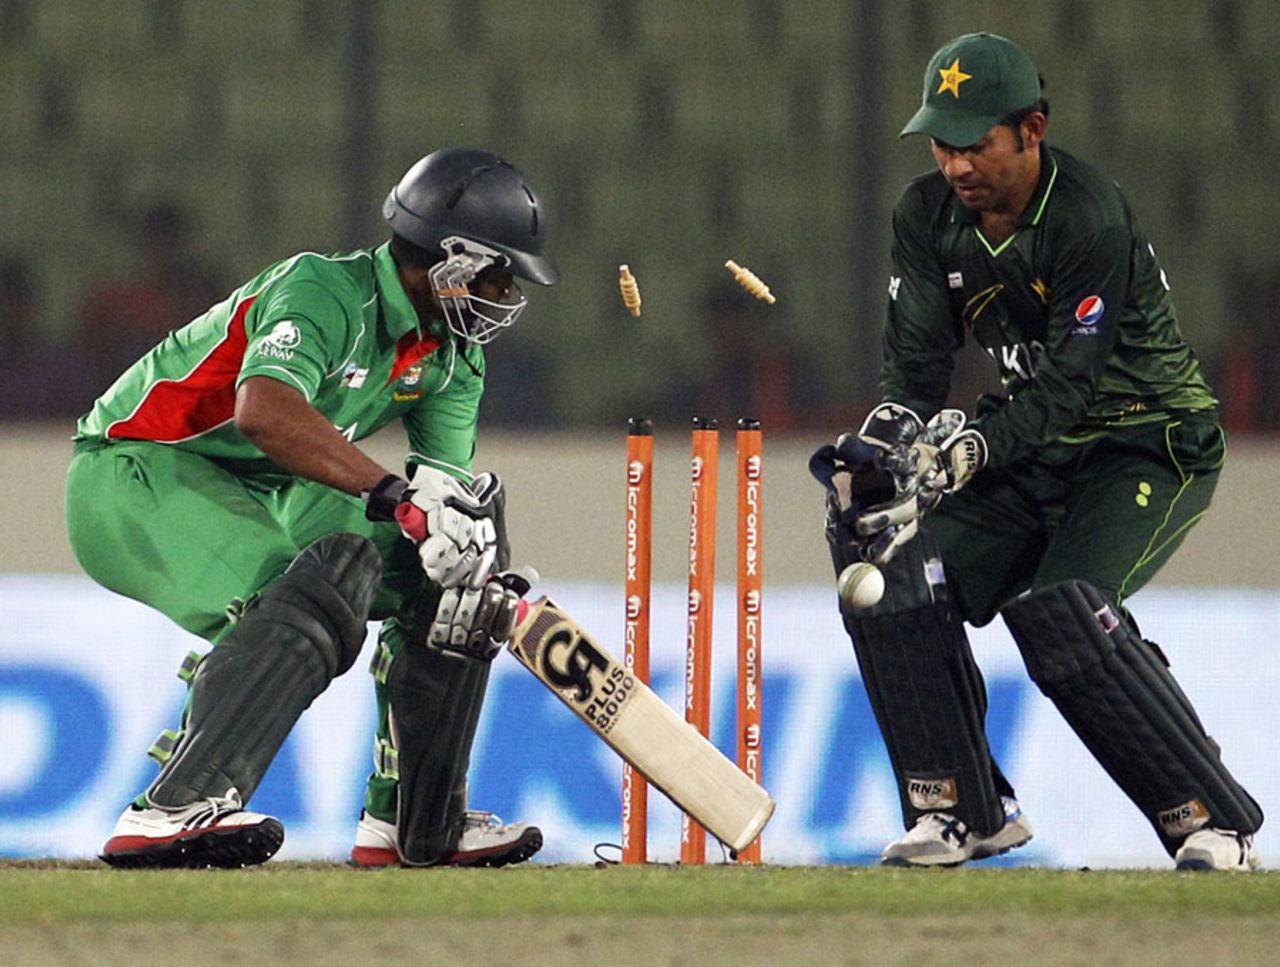 Tamim Iqbal is cleaned up, Bangladesh v Pakistan, Asia Cup, Mirpur, March 11, 2012